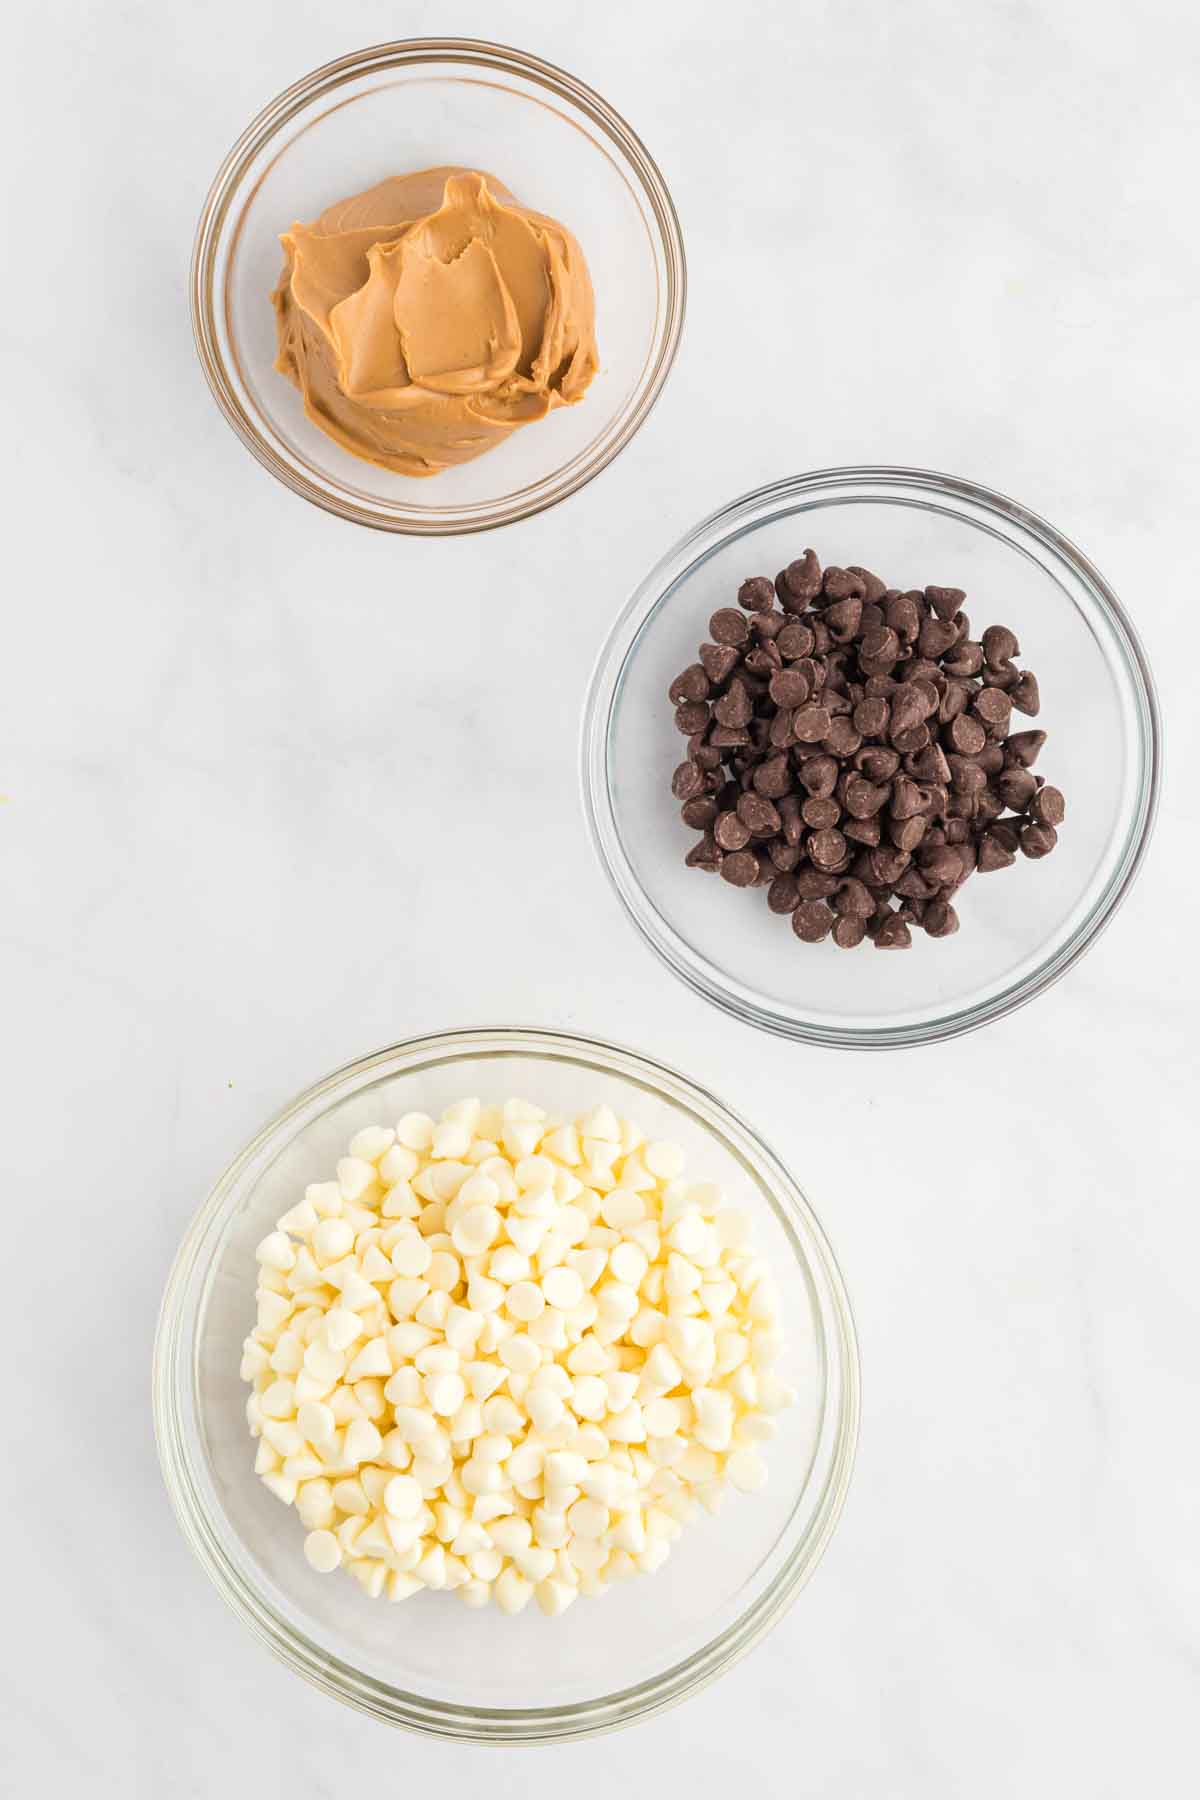 Ingredients needed - vanilla chips, peanut butter, chocolate chips